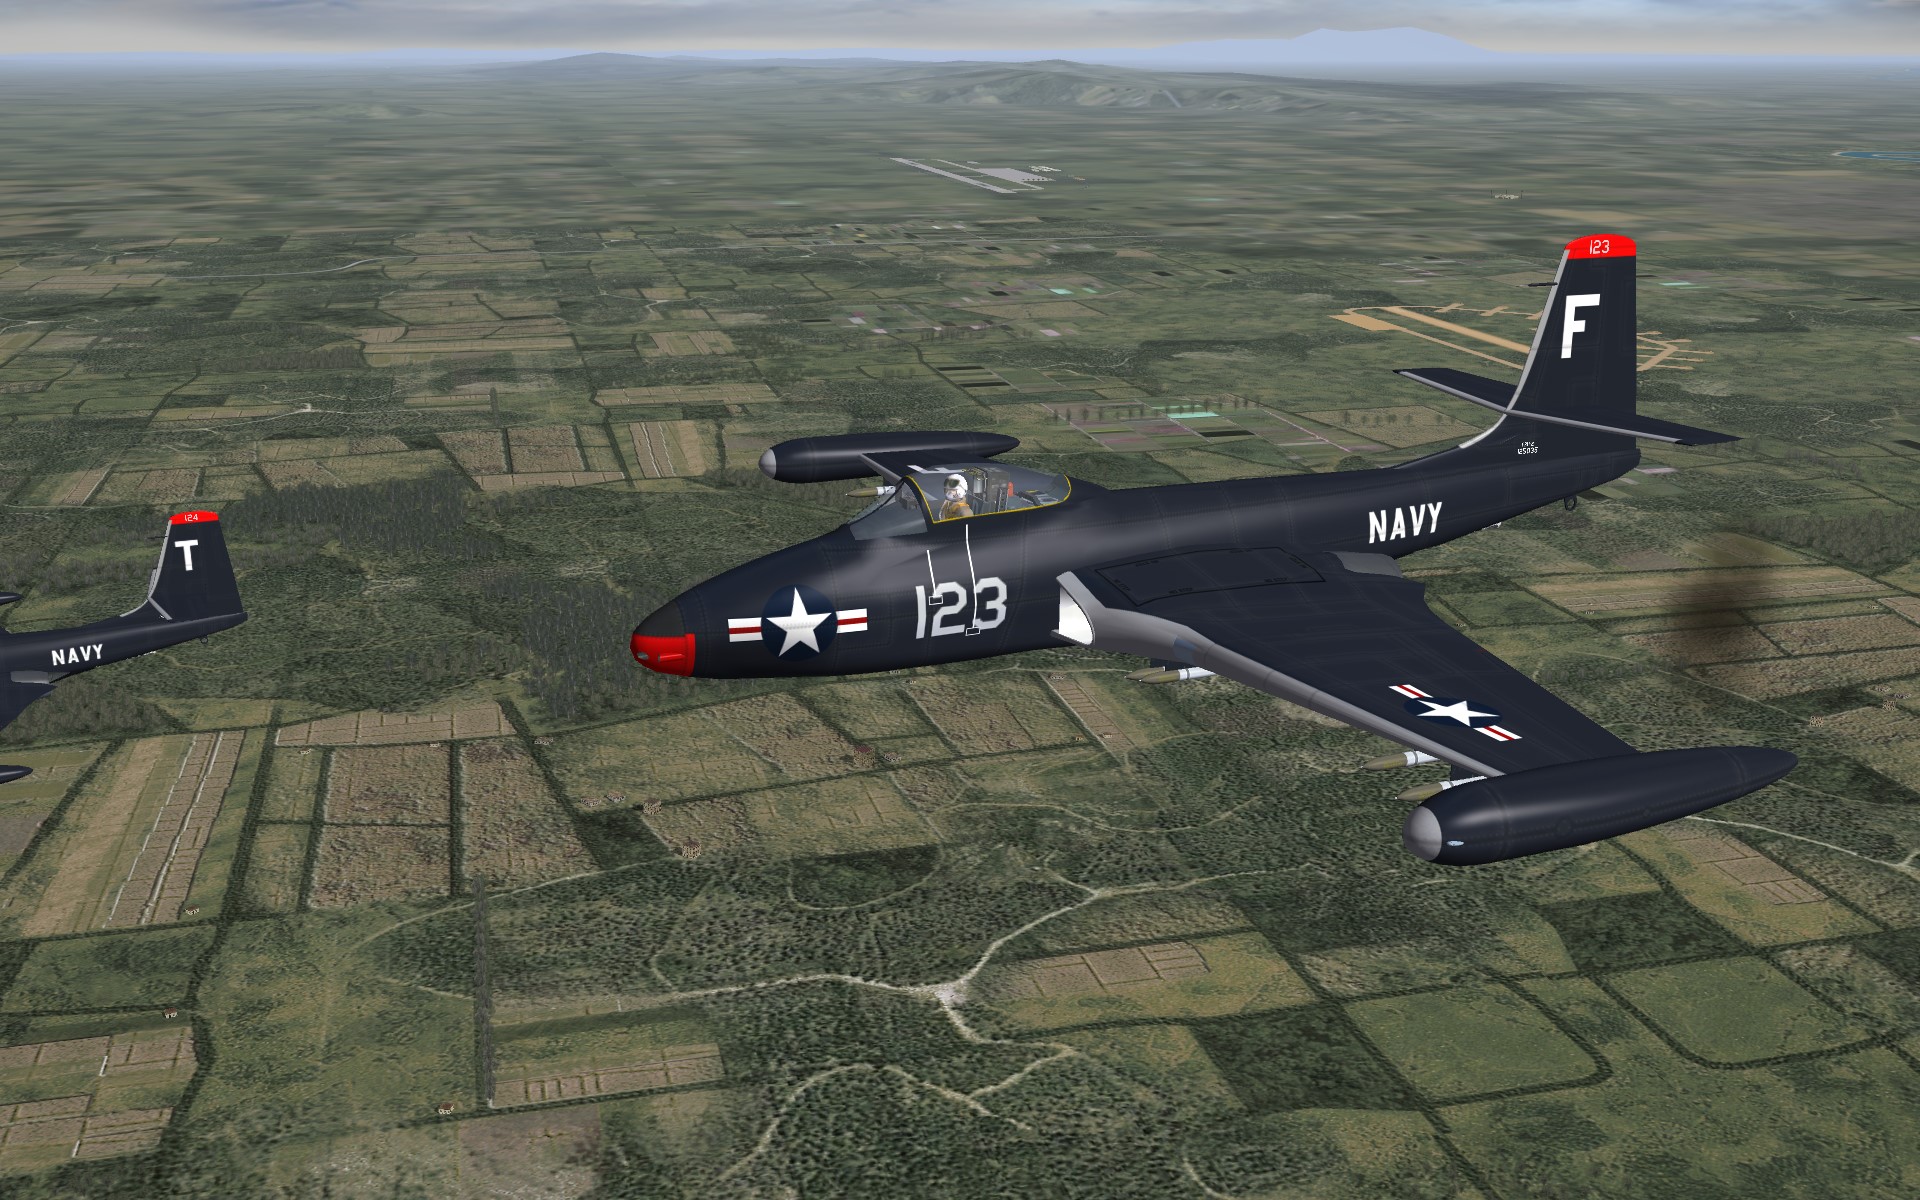 Colourful Korea - A skin and decals pack for Wings over Korea